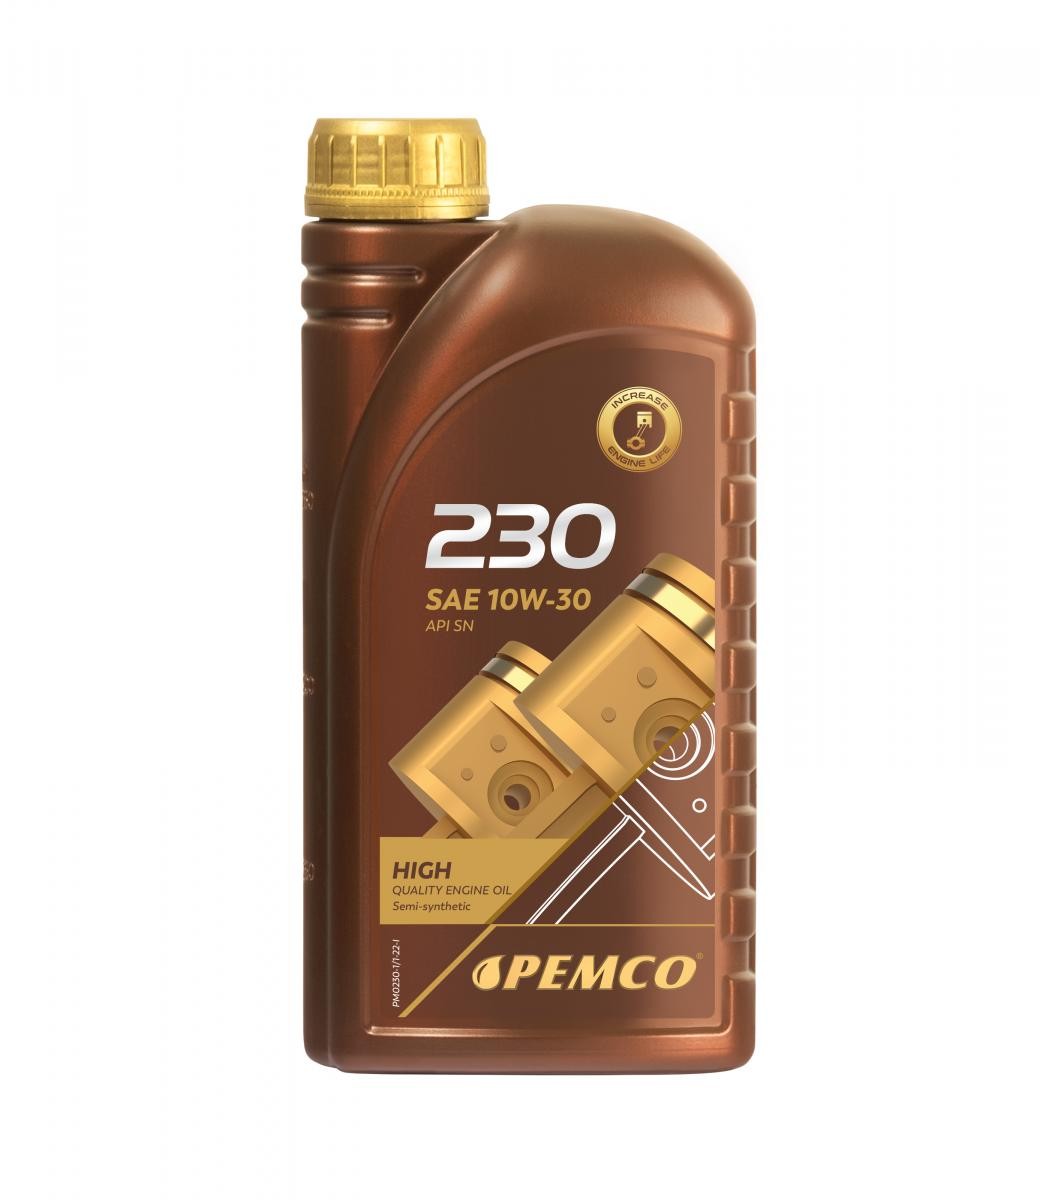 Great value for money - PEMCO Engine oil PM0230-1